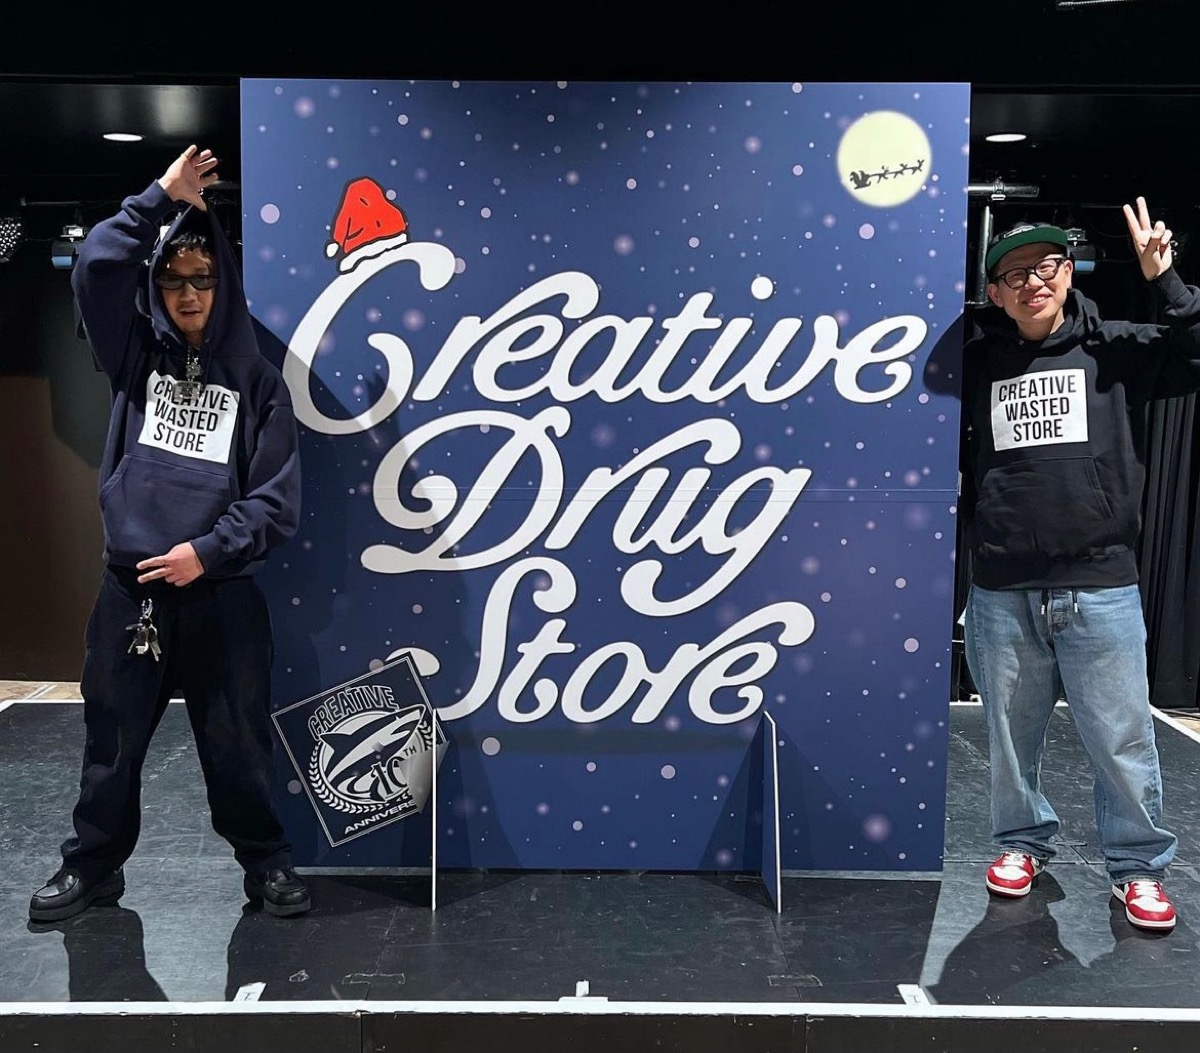 VERDY × Creative Drug Store 10周年記念コラボアイテムの抽選販売が国内12月26日まで受付 UP TO DATE